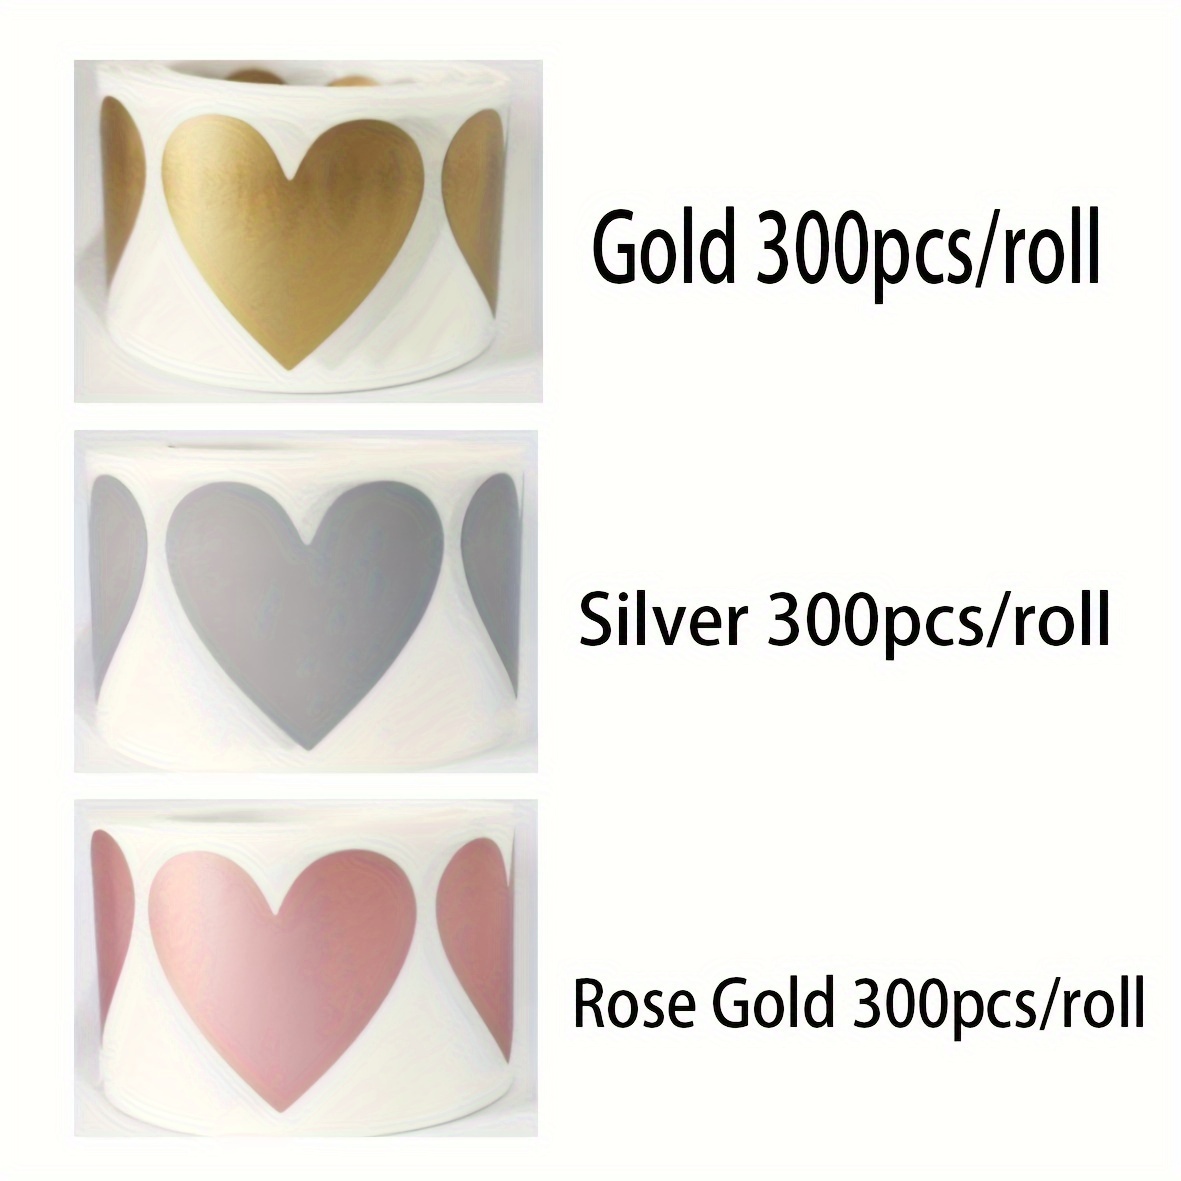 1.5 Glitter Gold Heart Stickers, Large Heart Foil Labels Valentines Decor 500 Pcs per Roll, Valentine's Day Love Decorations for Wedding